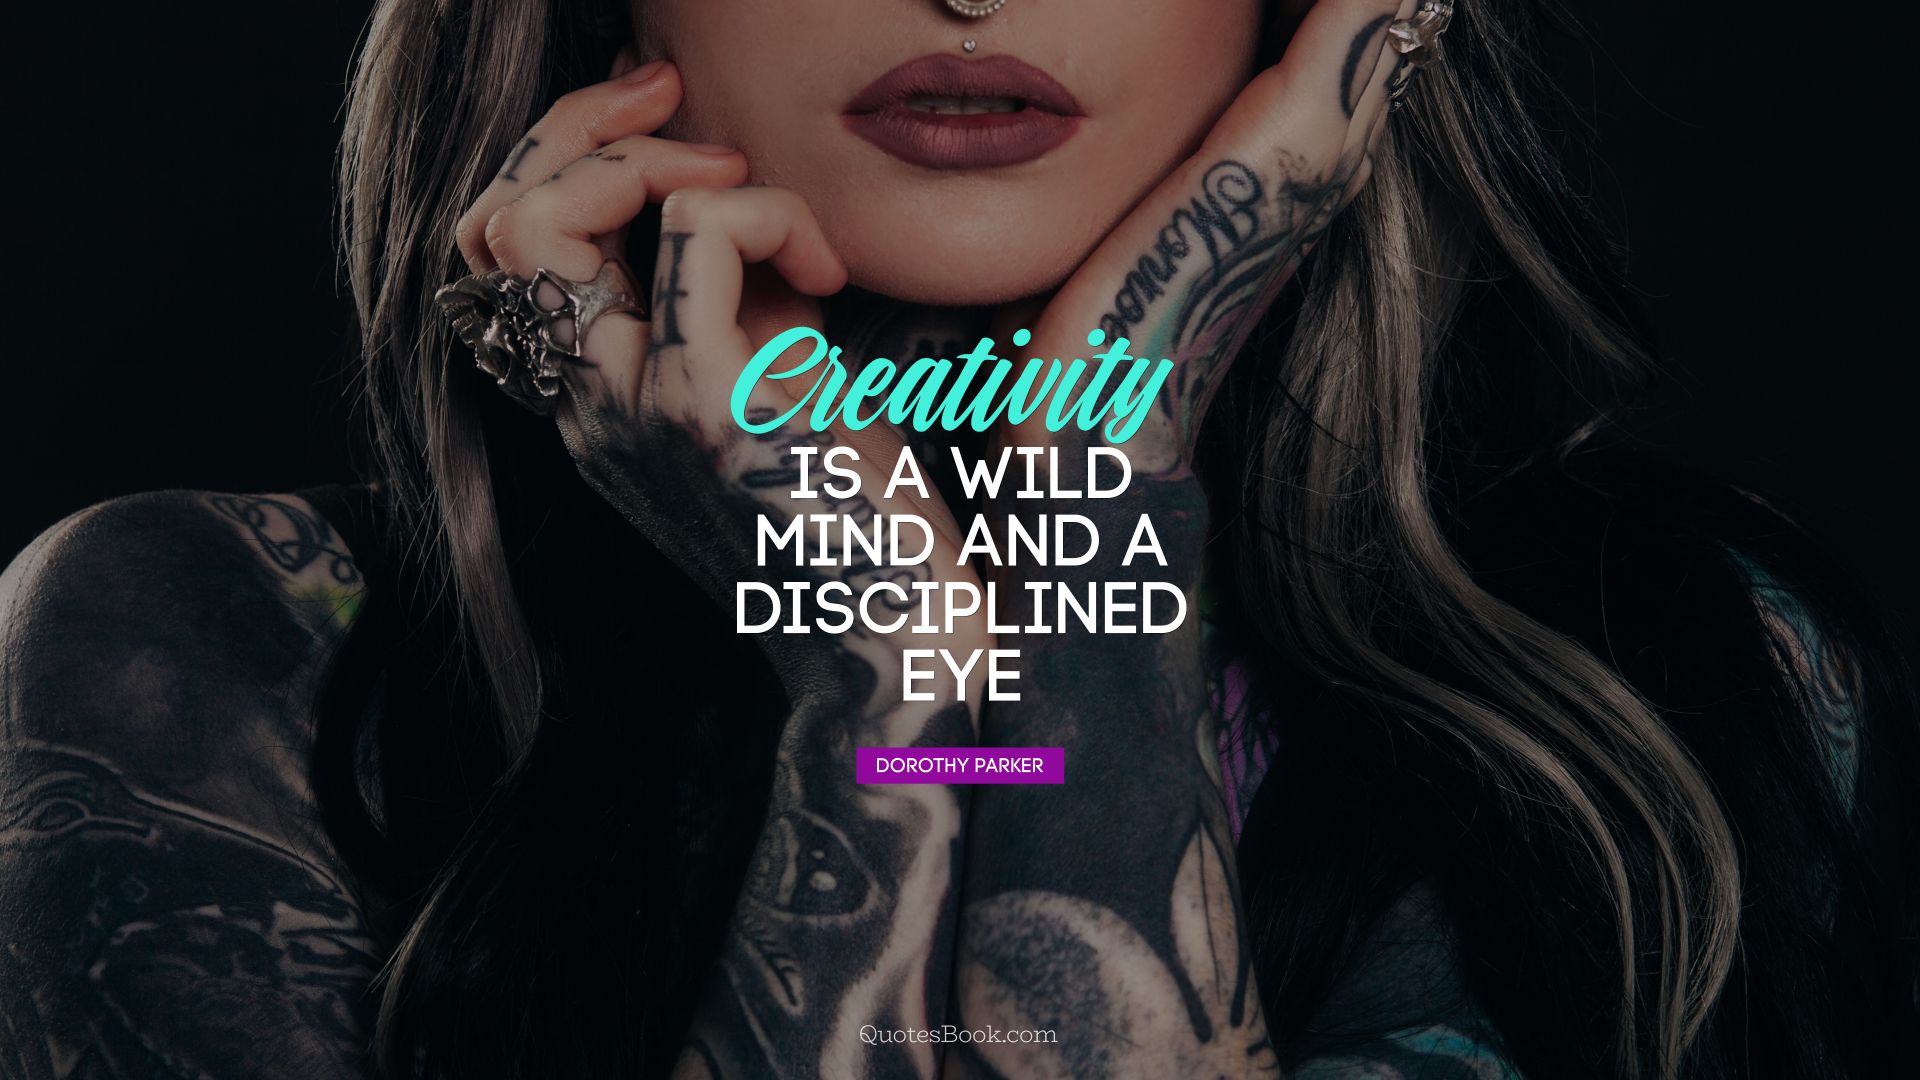 Creativity is a wild mind and a disciplined eye. - Quote by Dorothy Parker